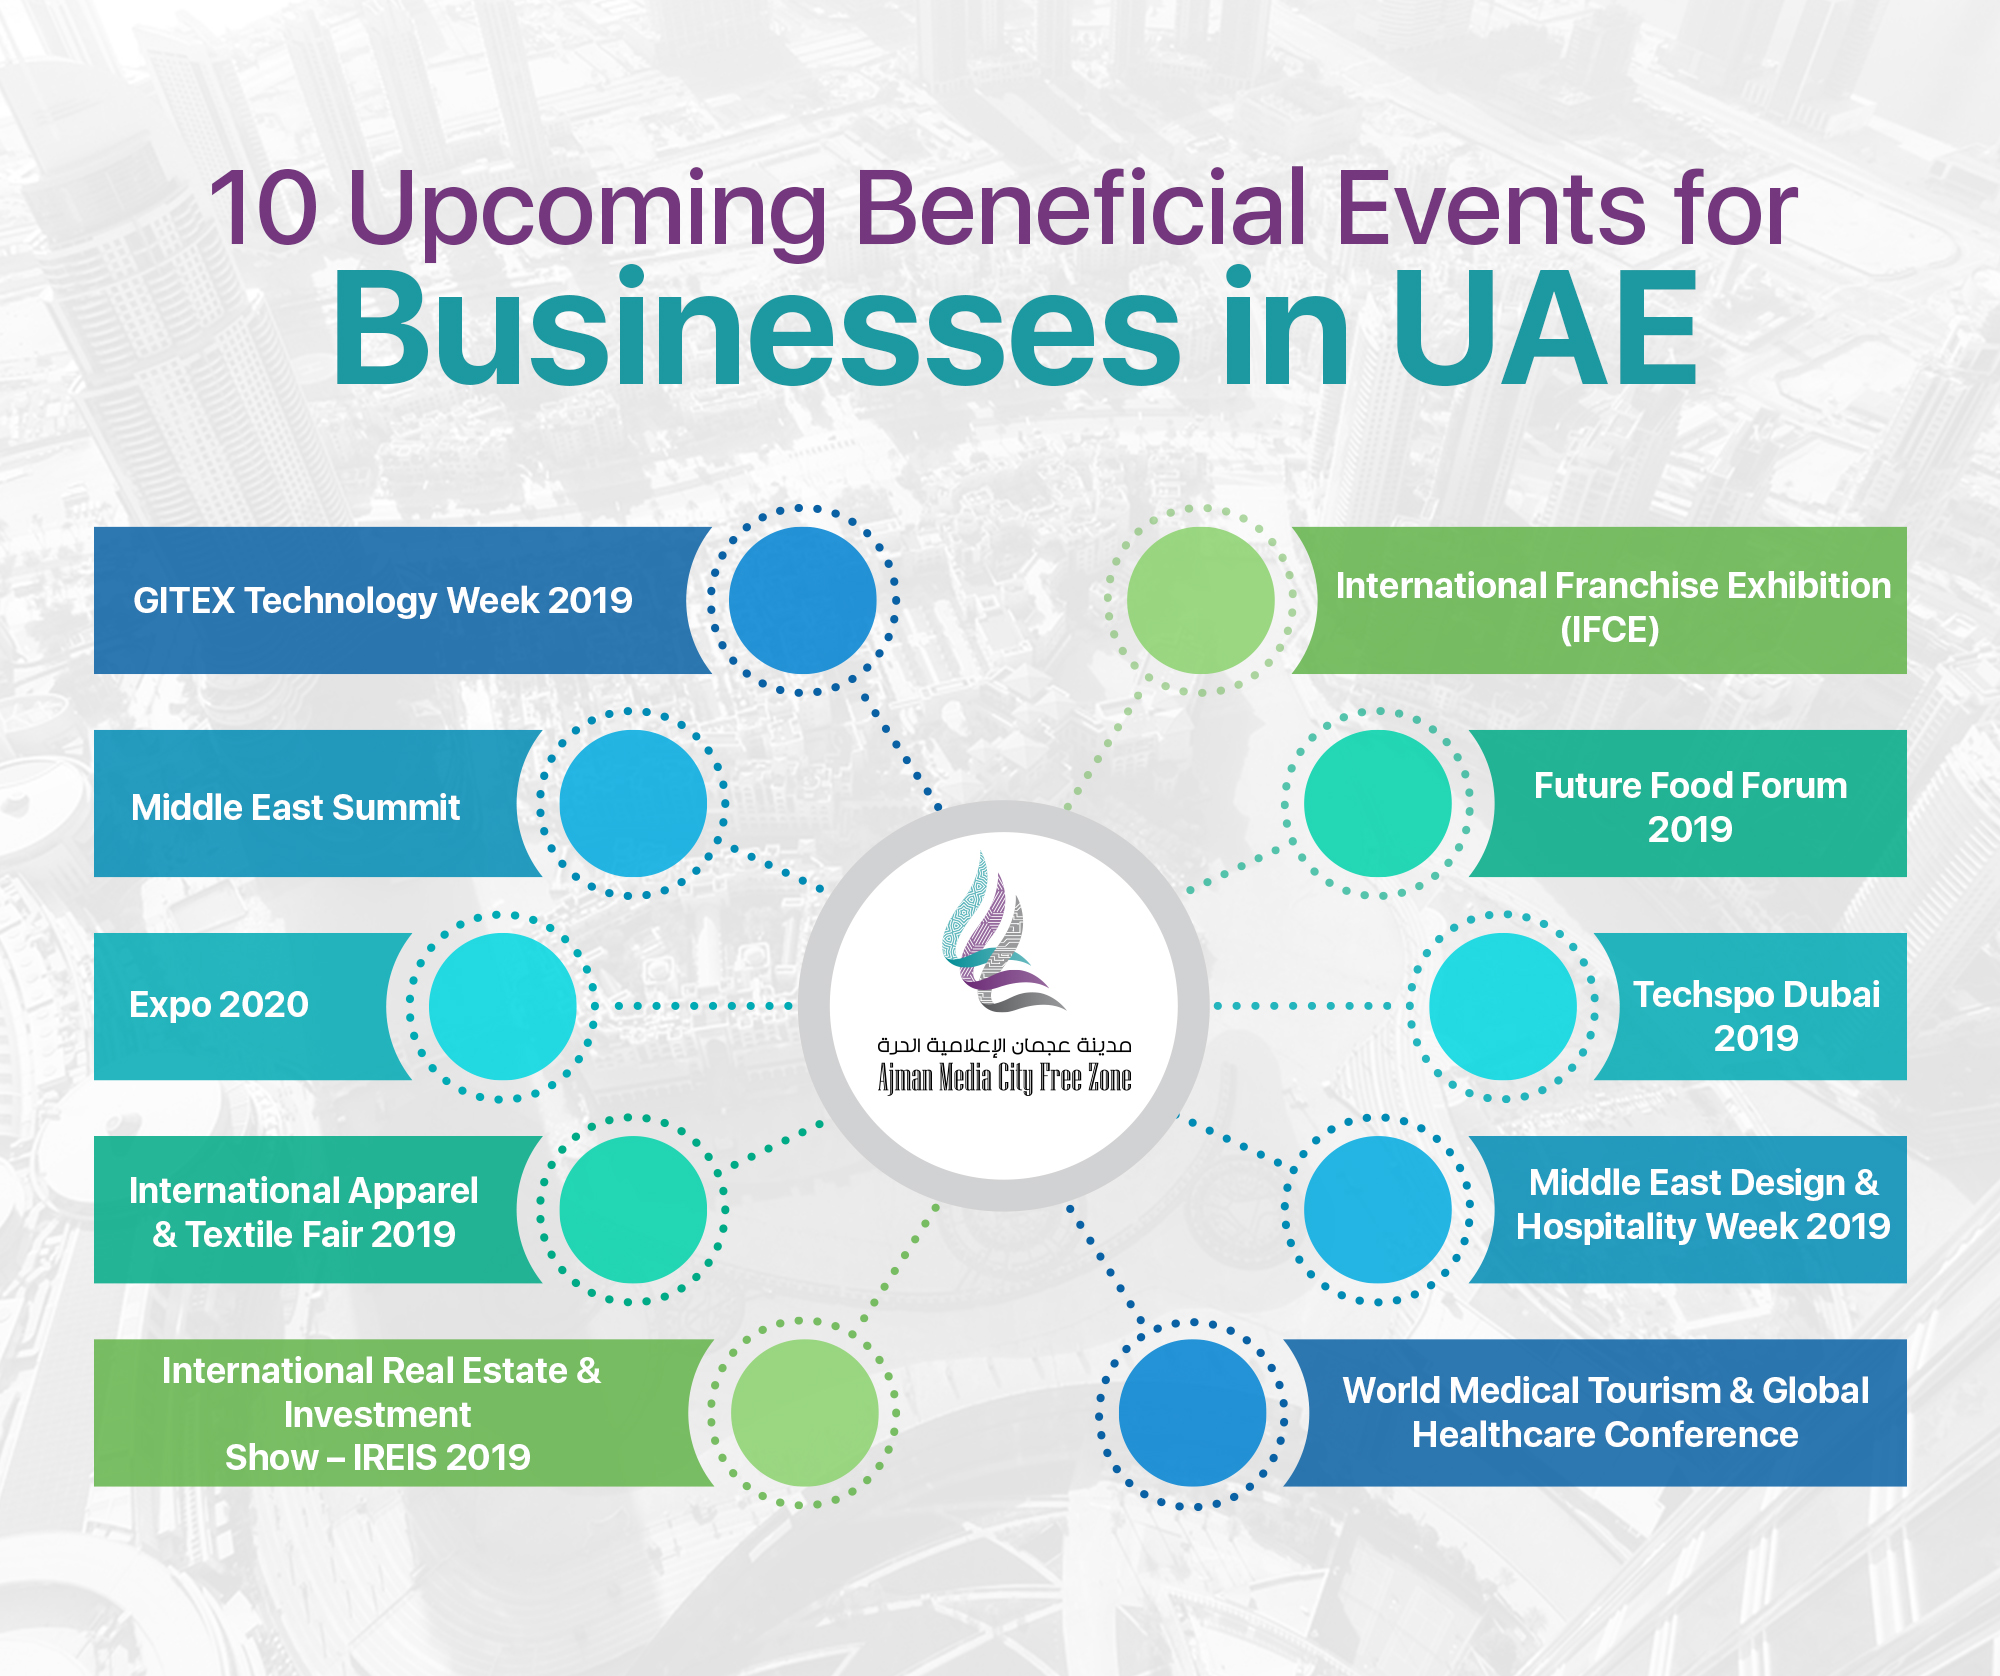 10 Upcoming Beneficial Events for Businesses in UAE